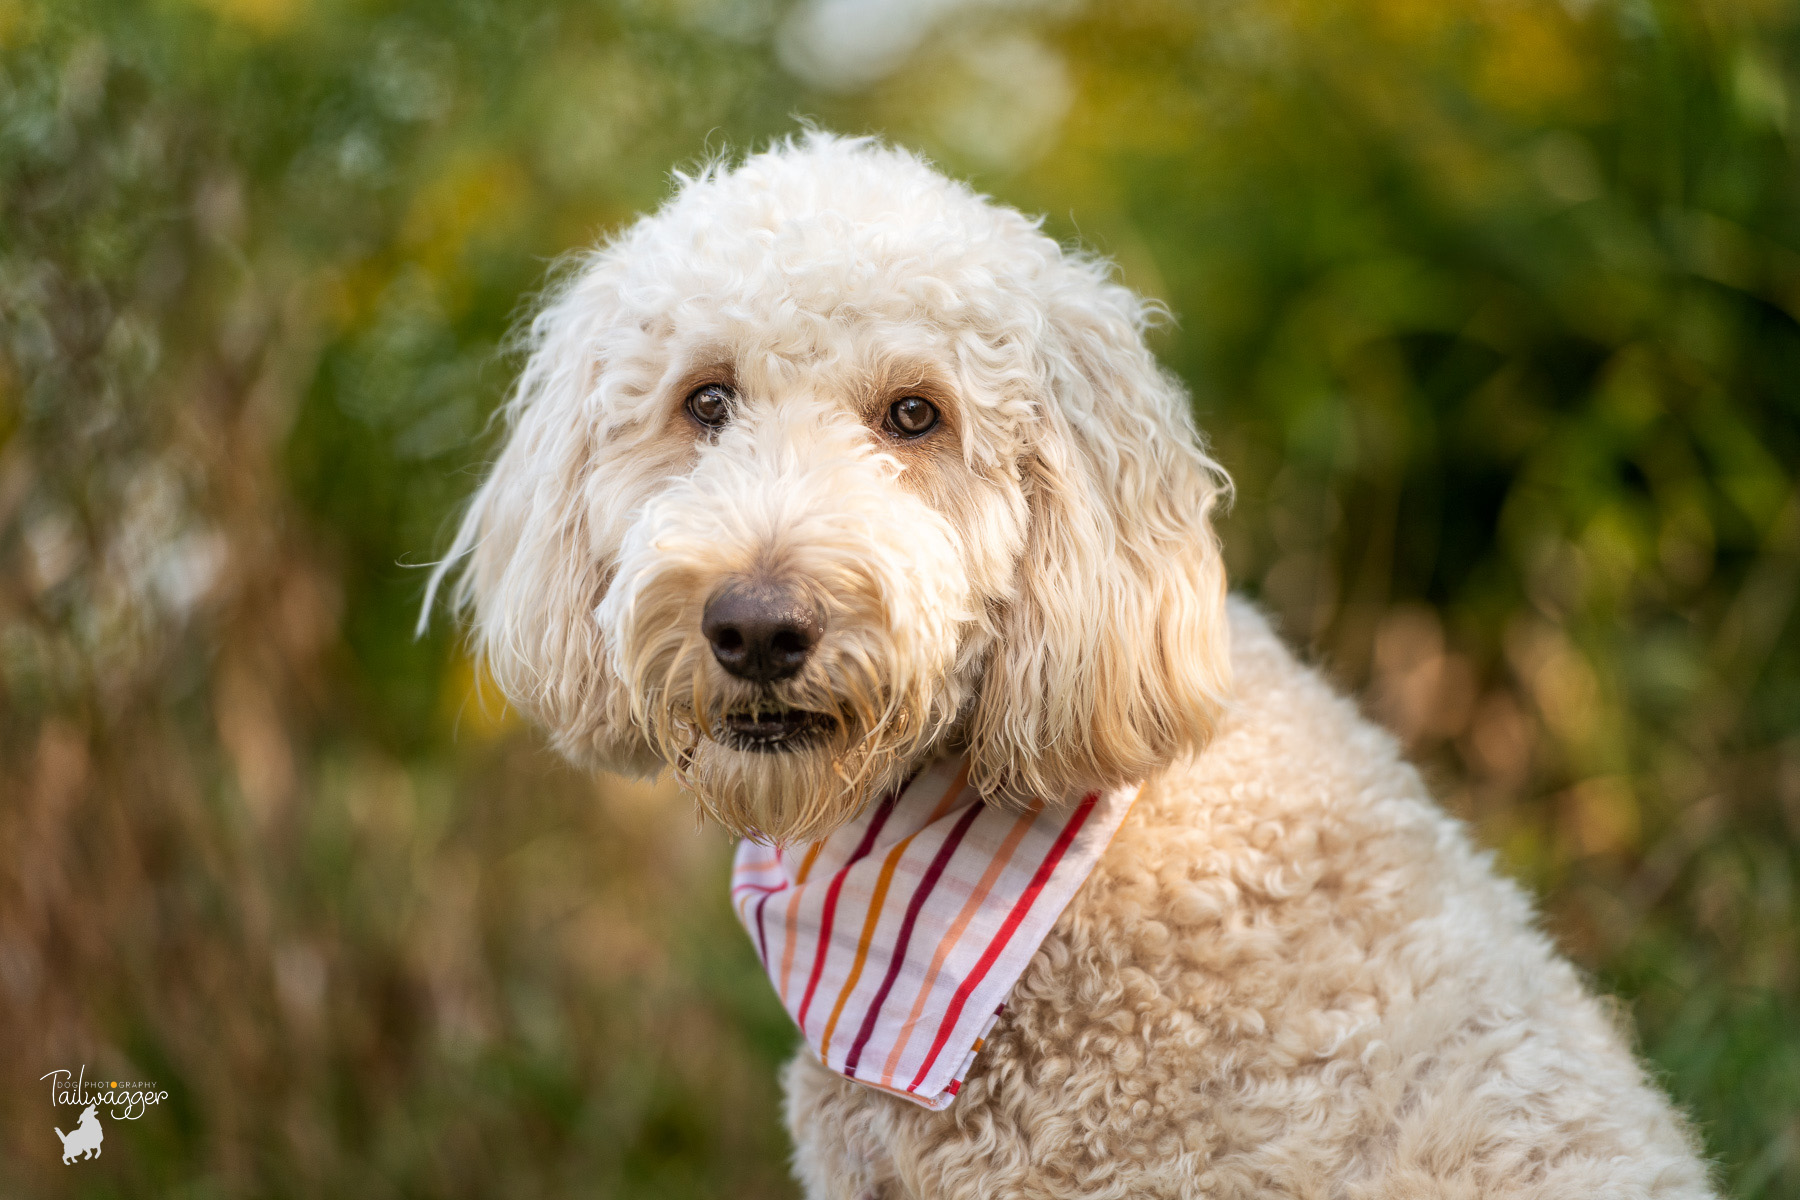 A headshot of a Goldendoodle taken at Retriever Fever at Grand Ravines Dog Park in Ottawa County, MI.